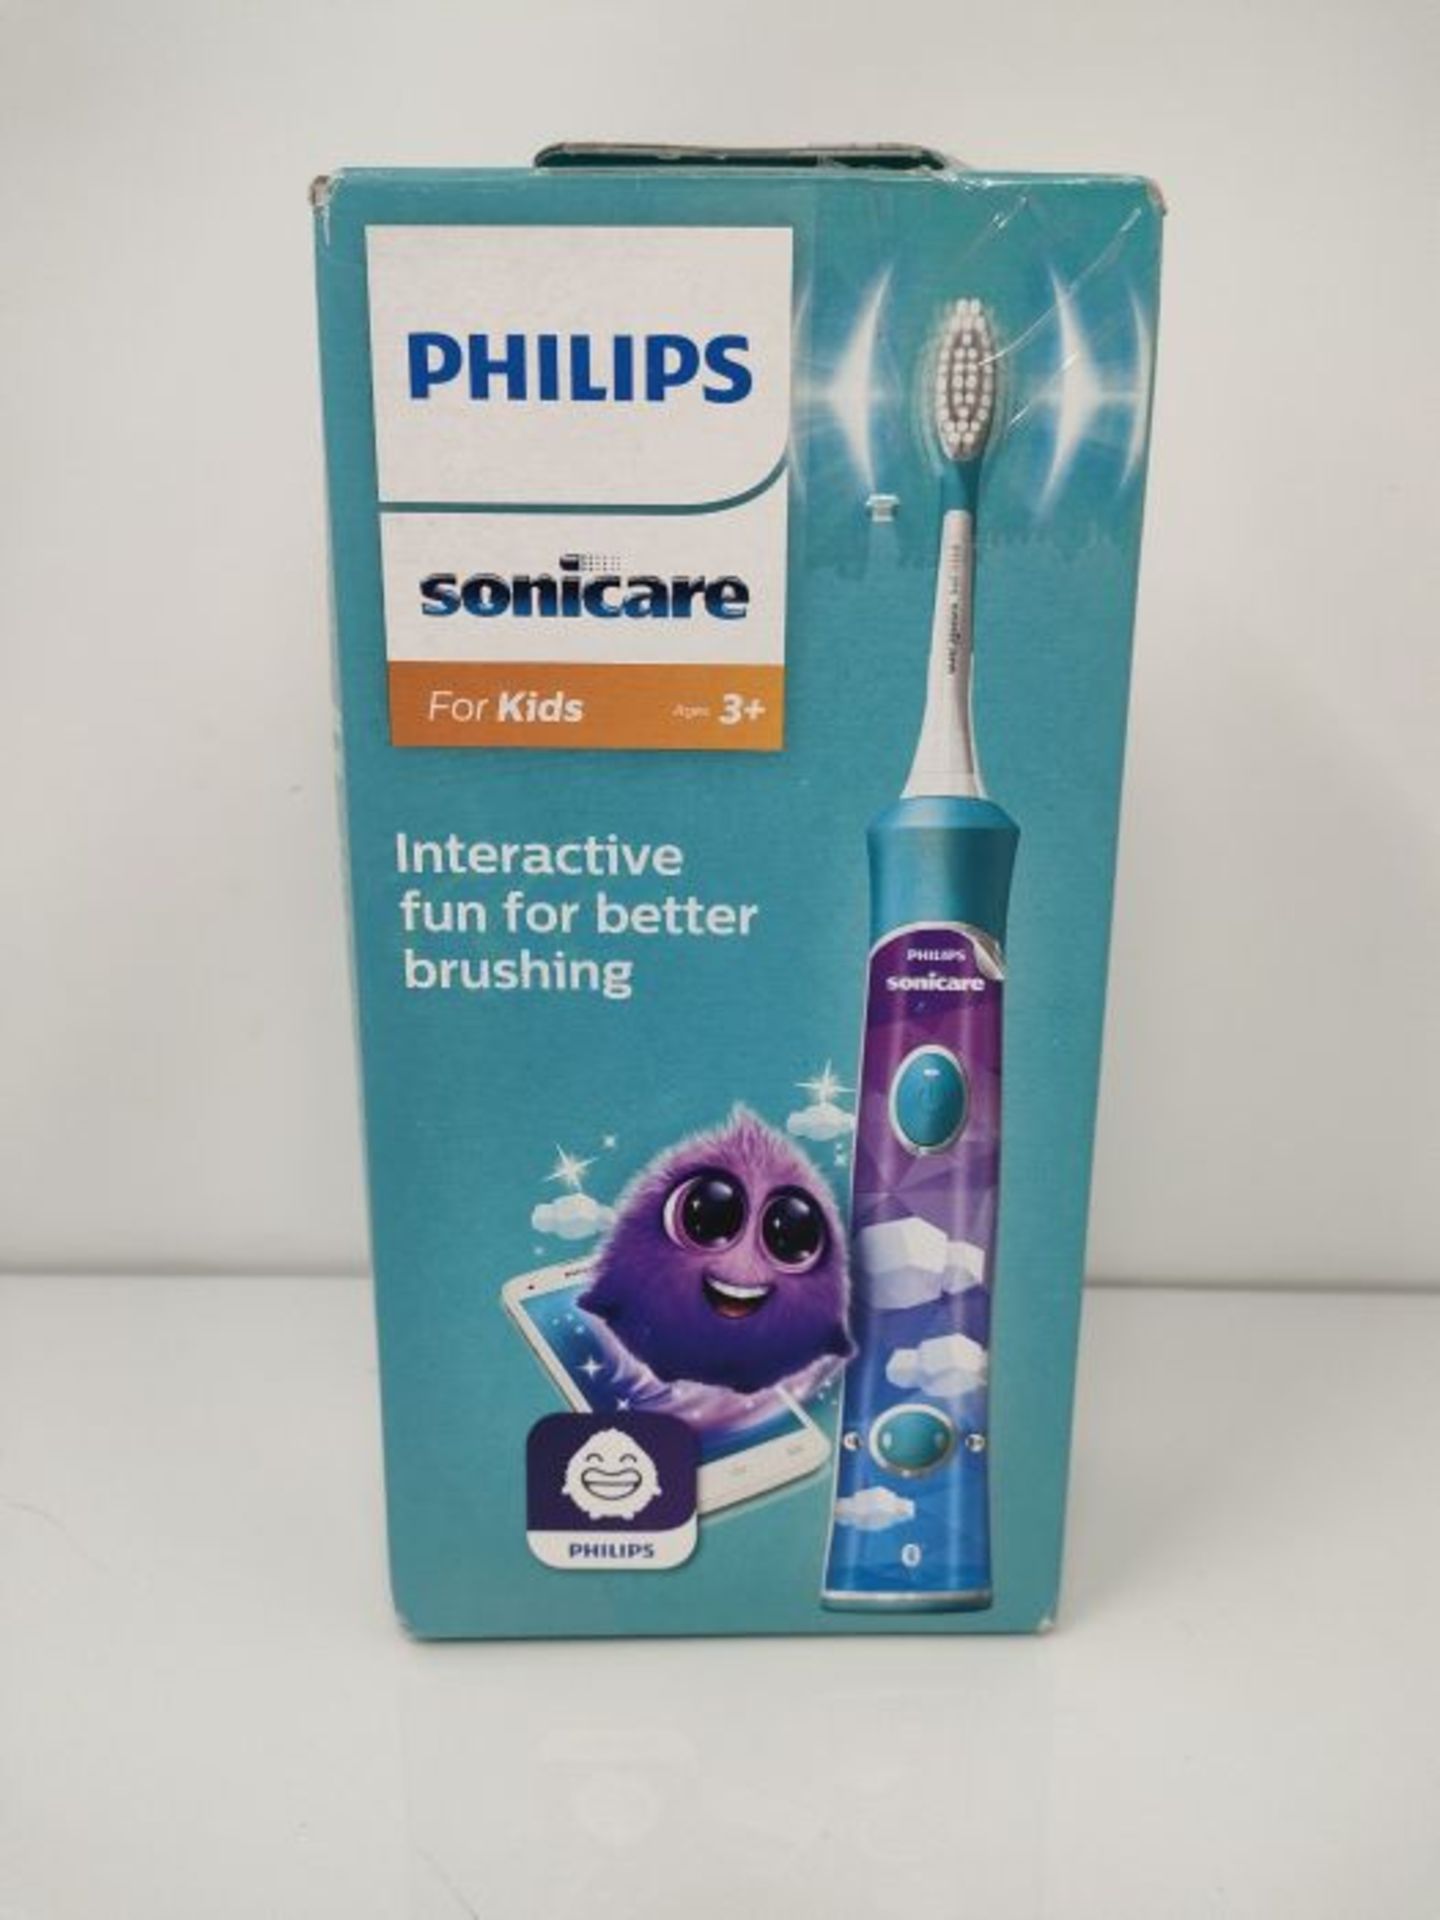 Philips Sonicare For Kids Electric Toothbrush HX6322 / 04, With Sound Technology, For - Image 2 of 3